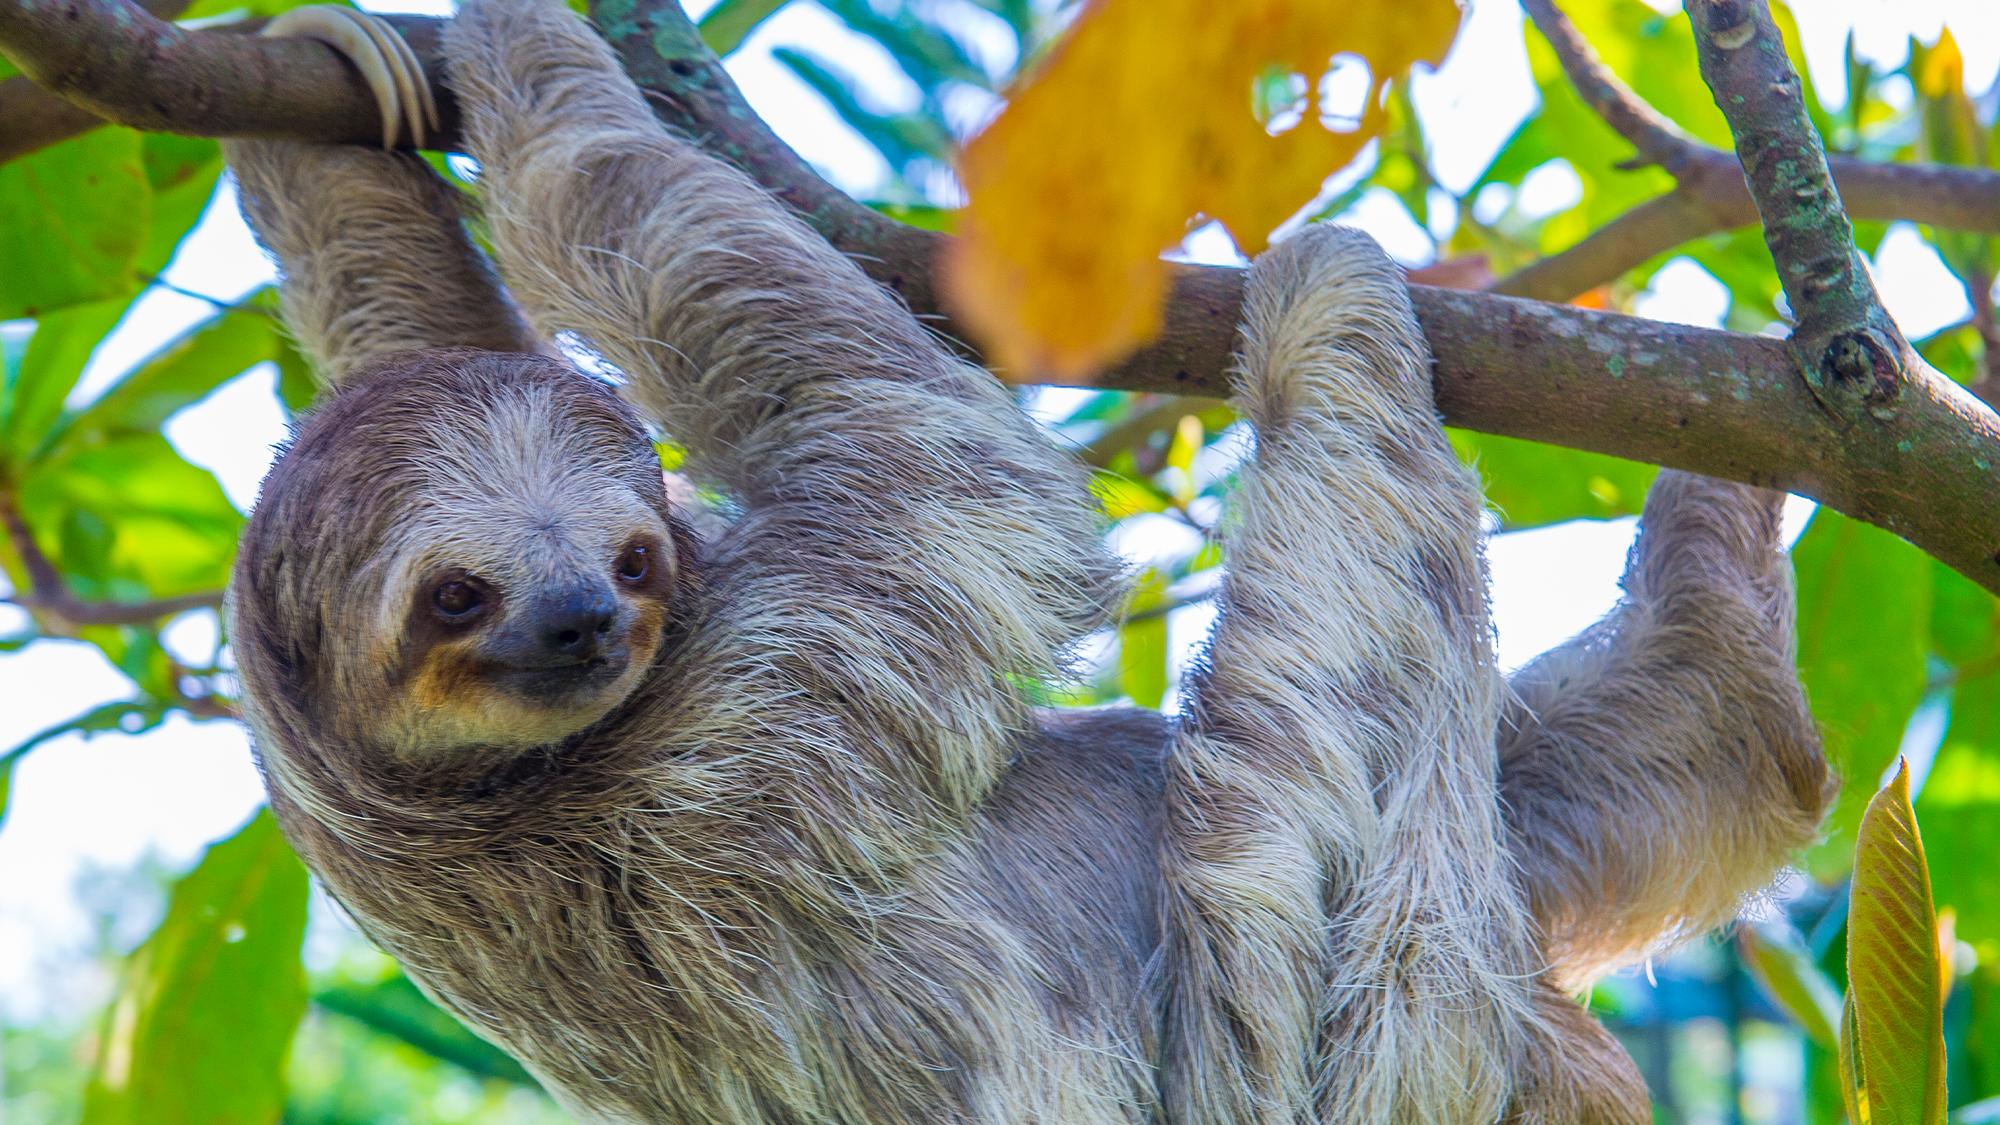 A sloth hangs in a tree in Costa Rica. The mammals have the slowest digestive system of any animal on Earth. It can take sloths two weeks to digest an entire meal, and they sleep about 20 hours a day to conserve energy.